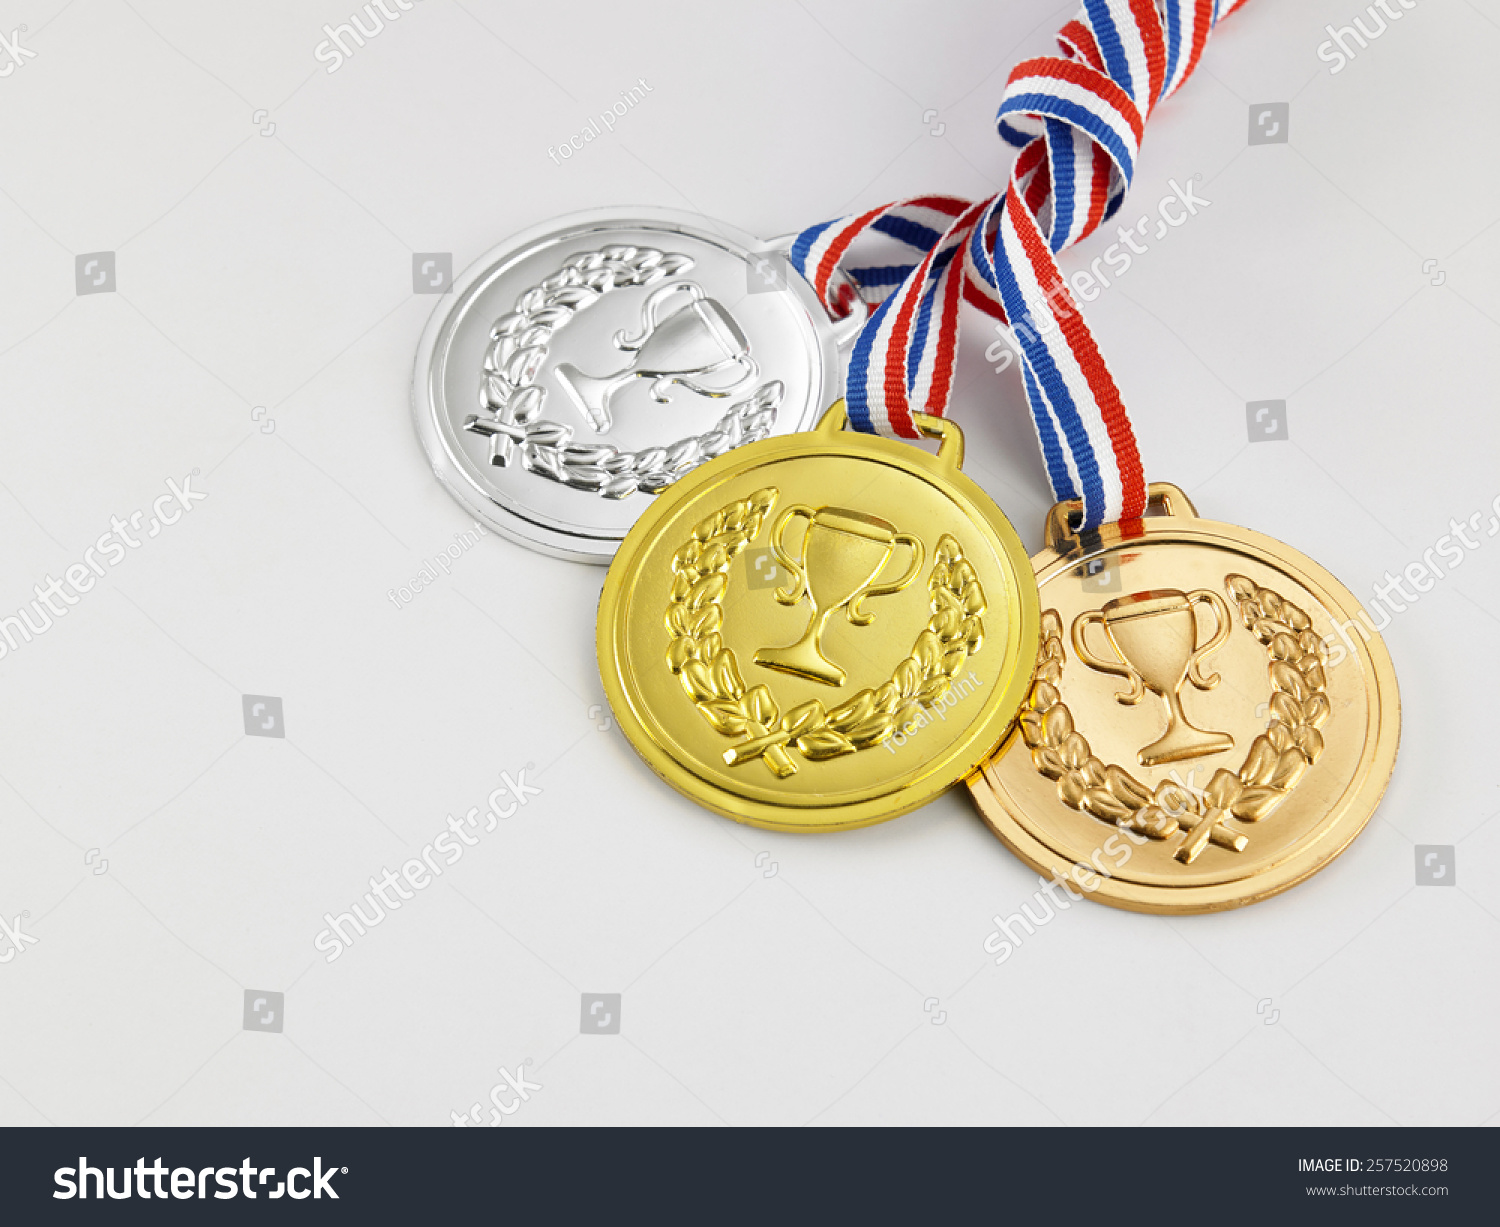 powerpoint-template-gold-silver-and-bronze-medal-jmomjhpup